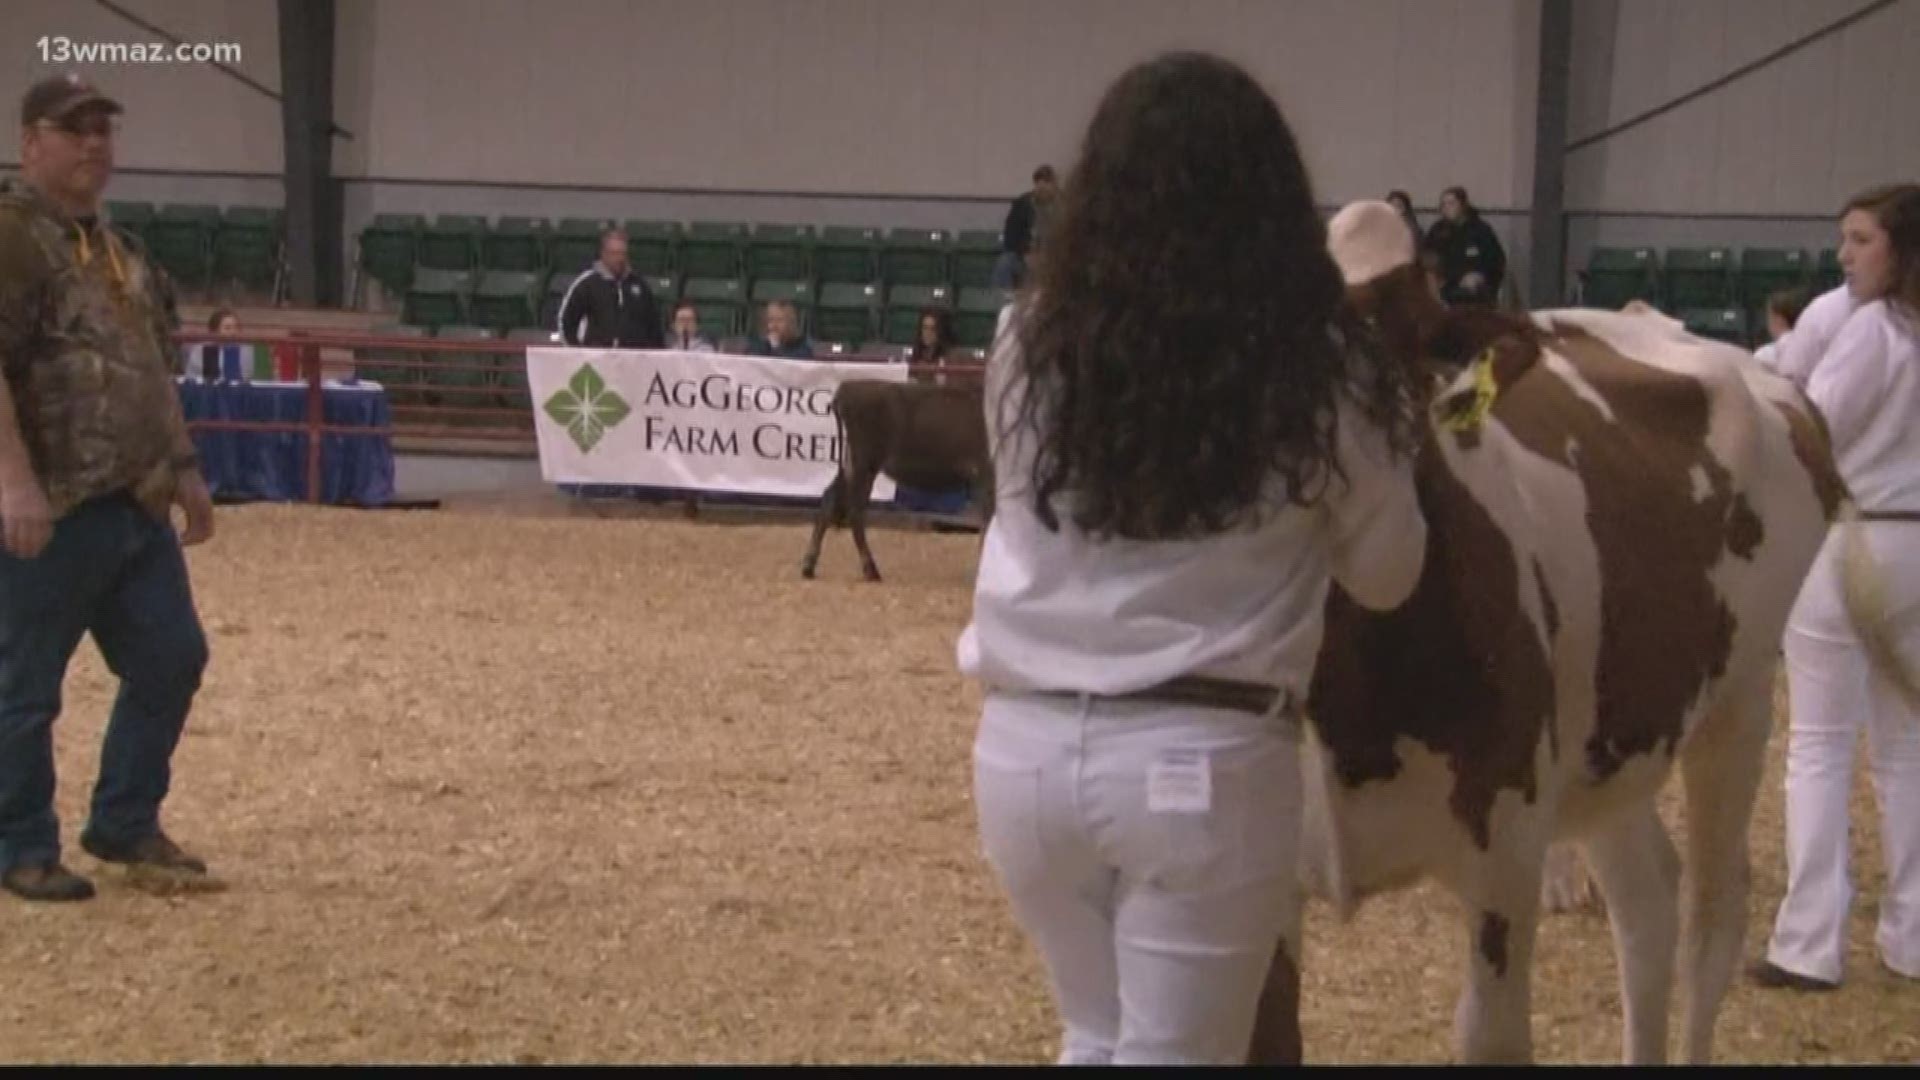 Students from middle and high schools competed with their cows.